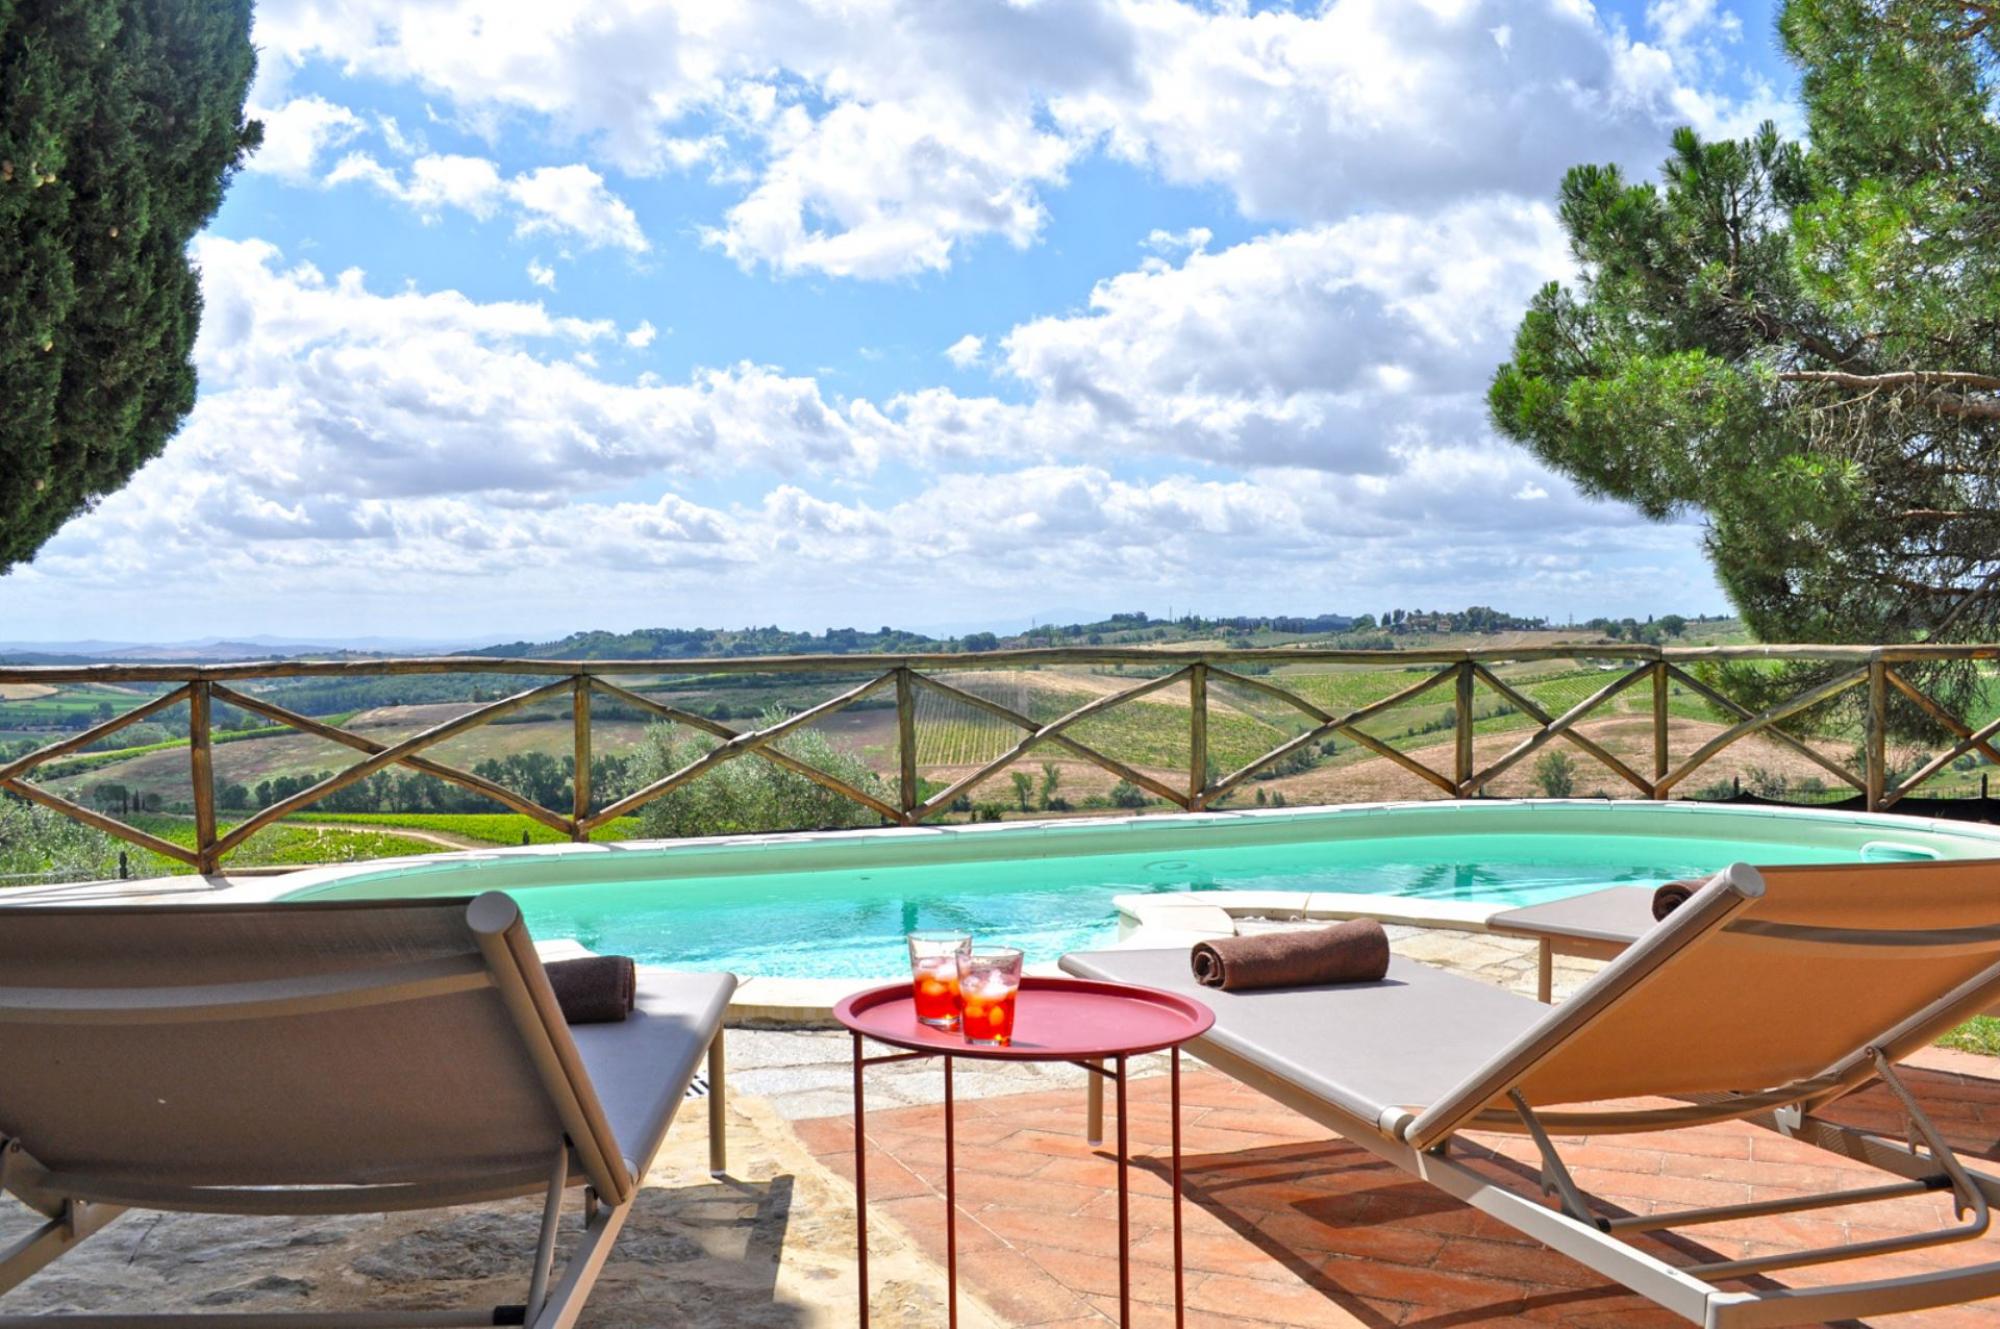 Property Image 1 - Beautiful villa with private pool immersed in the Tuscan countryside-Capanna al Lago